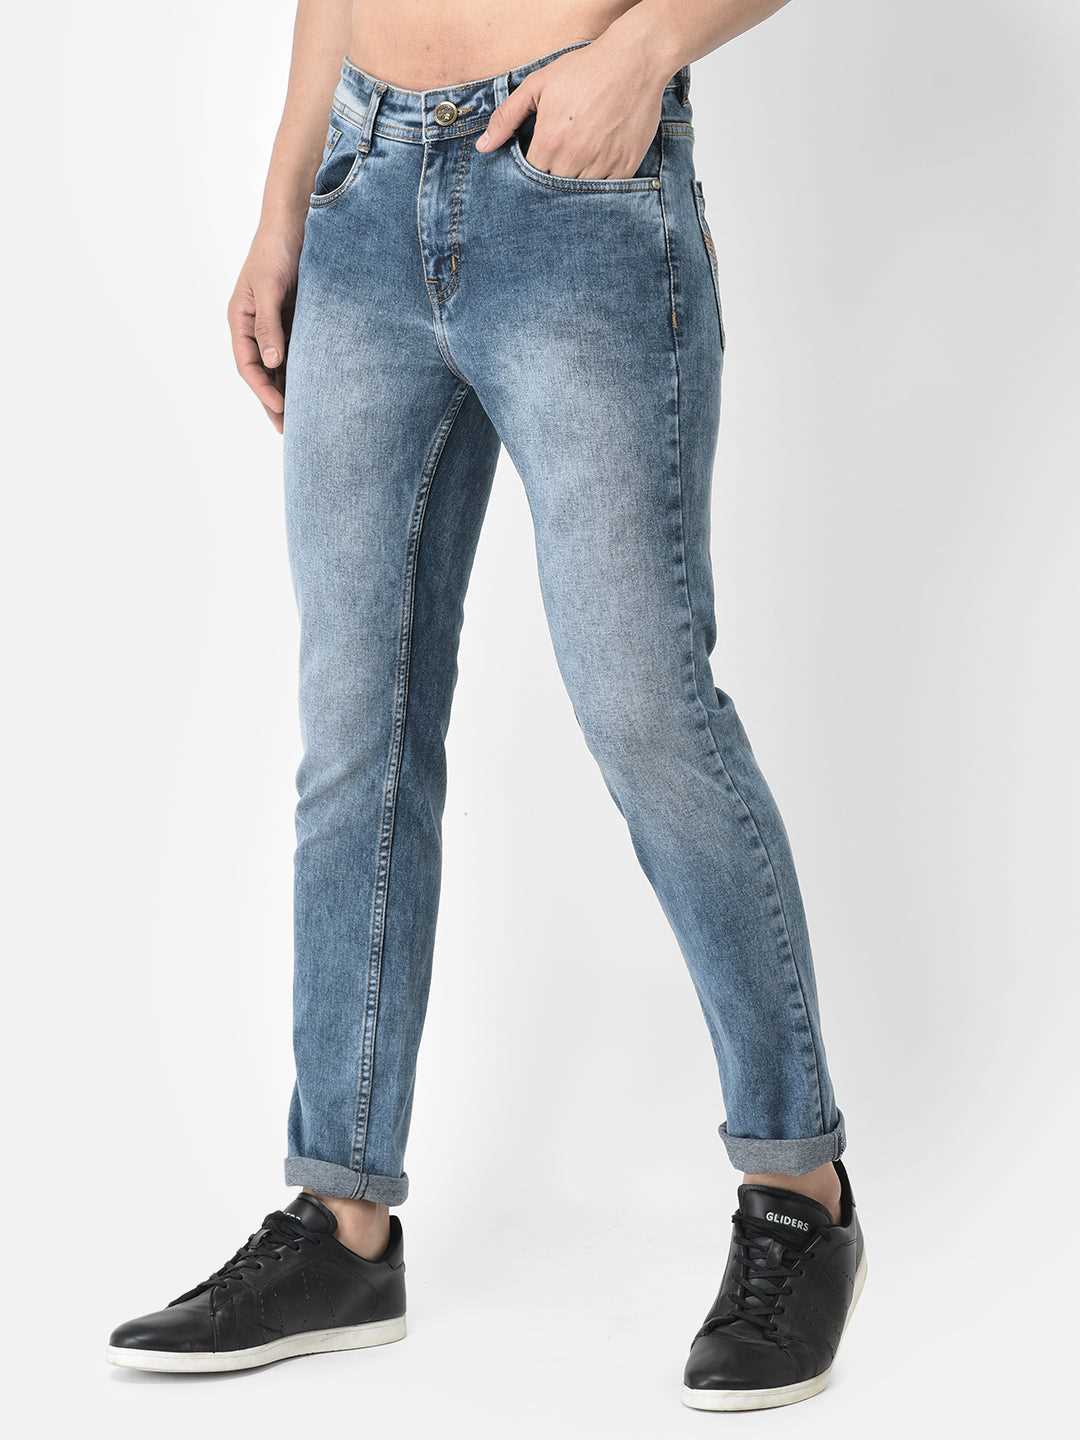 Japanese Style Embroidered Retro Denim Jeans Price For Men And Women Heavy,  Thick, Loose, And Straight Leg Pants J230806 From Carol_store, $14.87 |  DHgate.Com